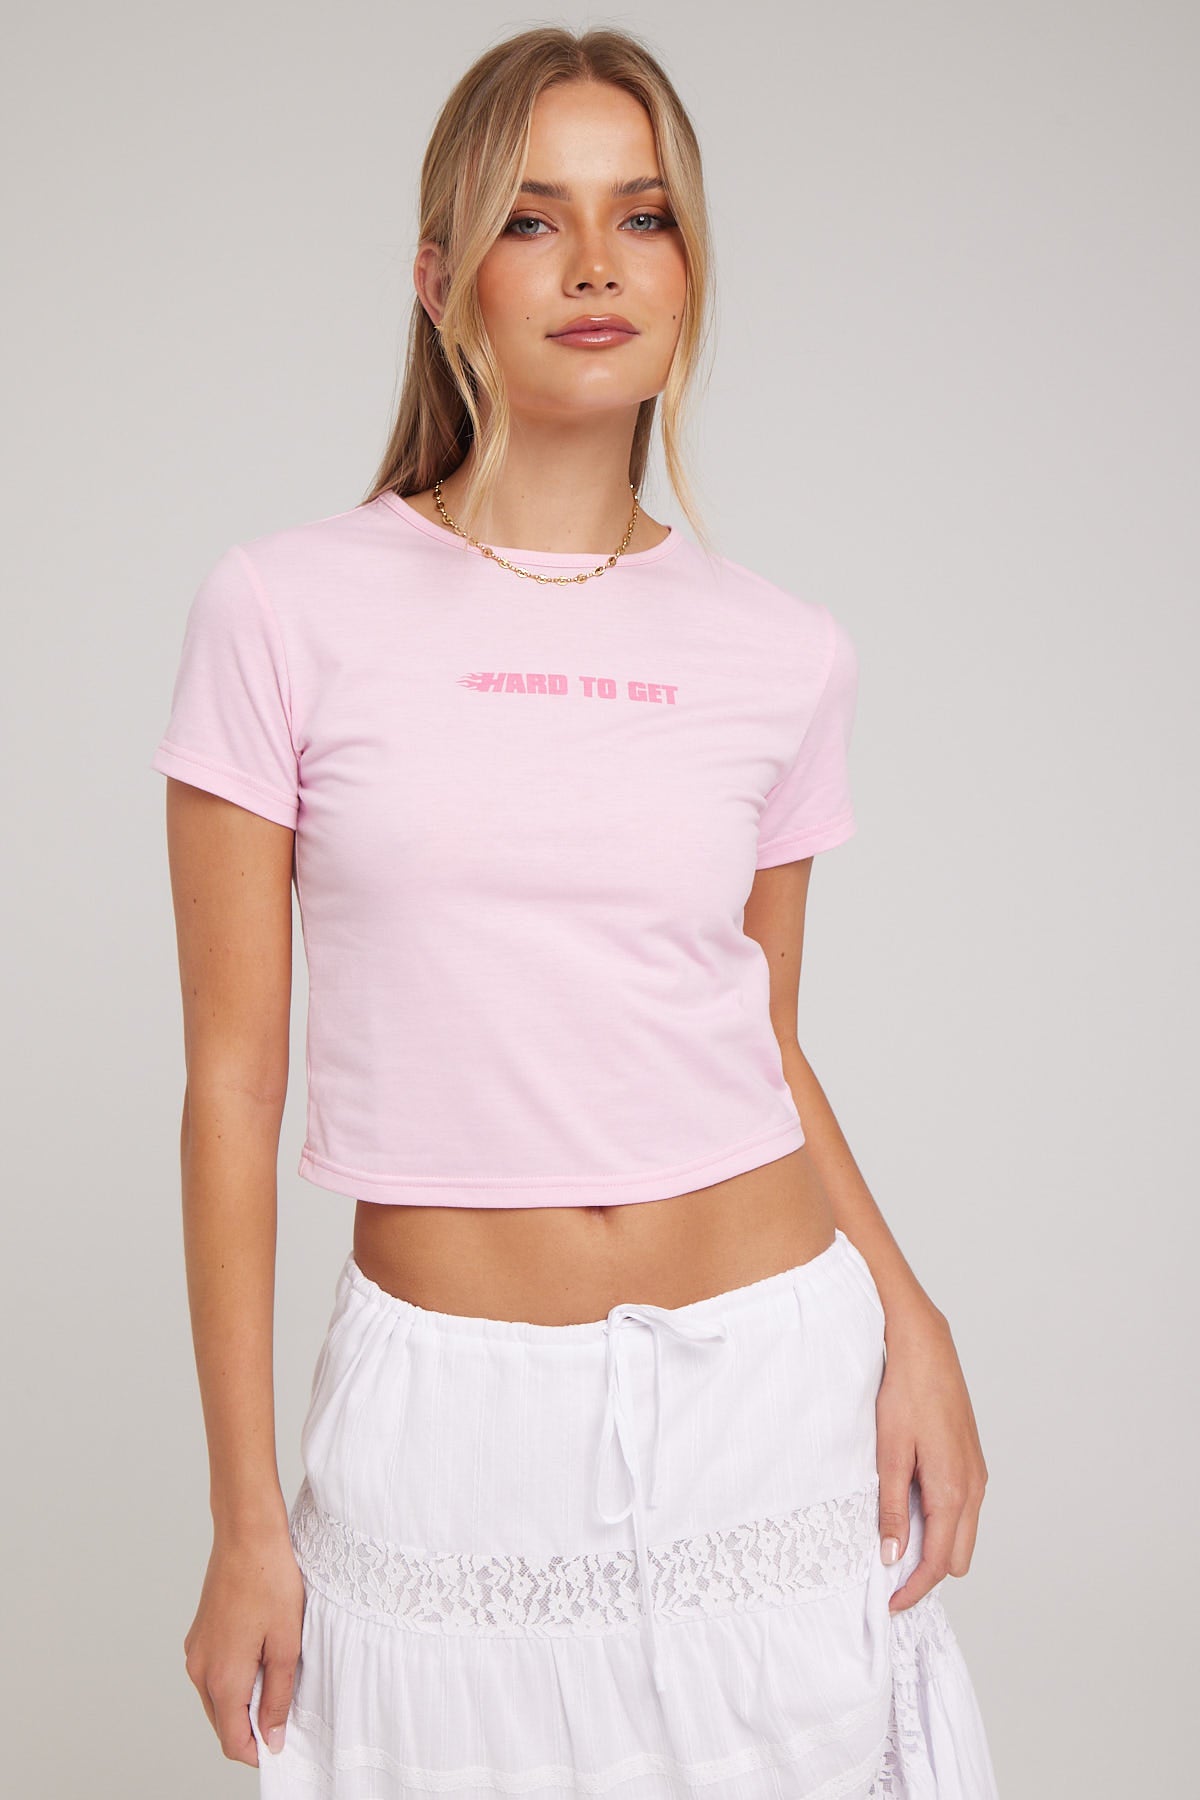 Lioness Hard To Get Tee Pink